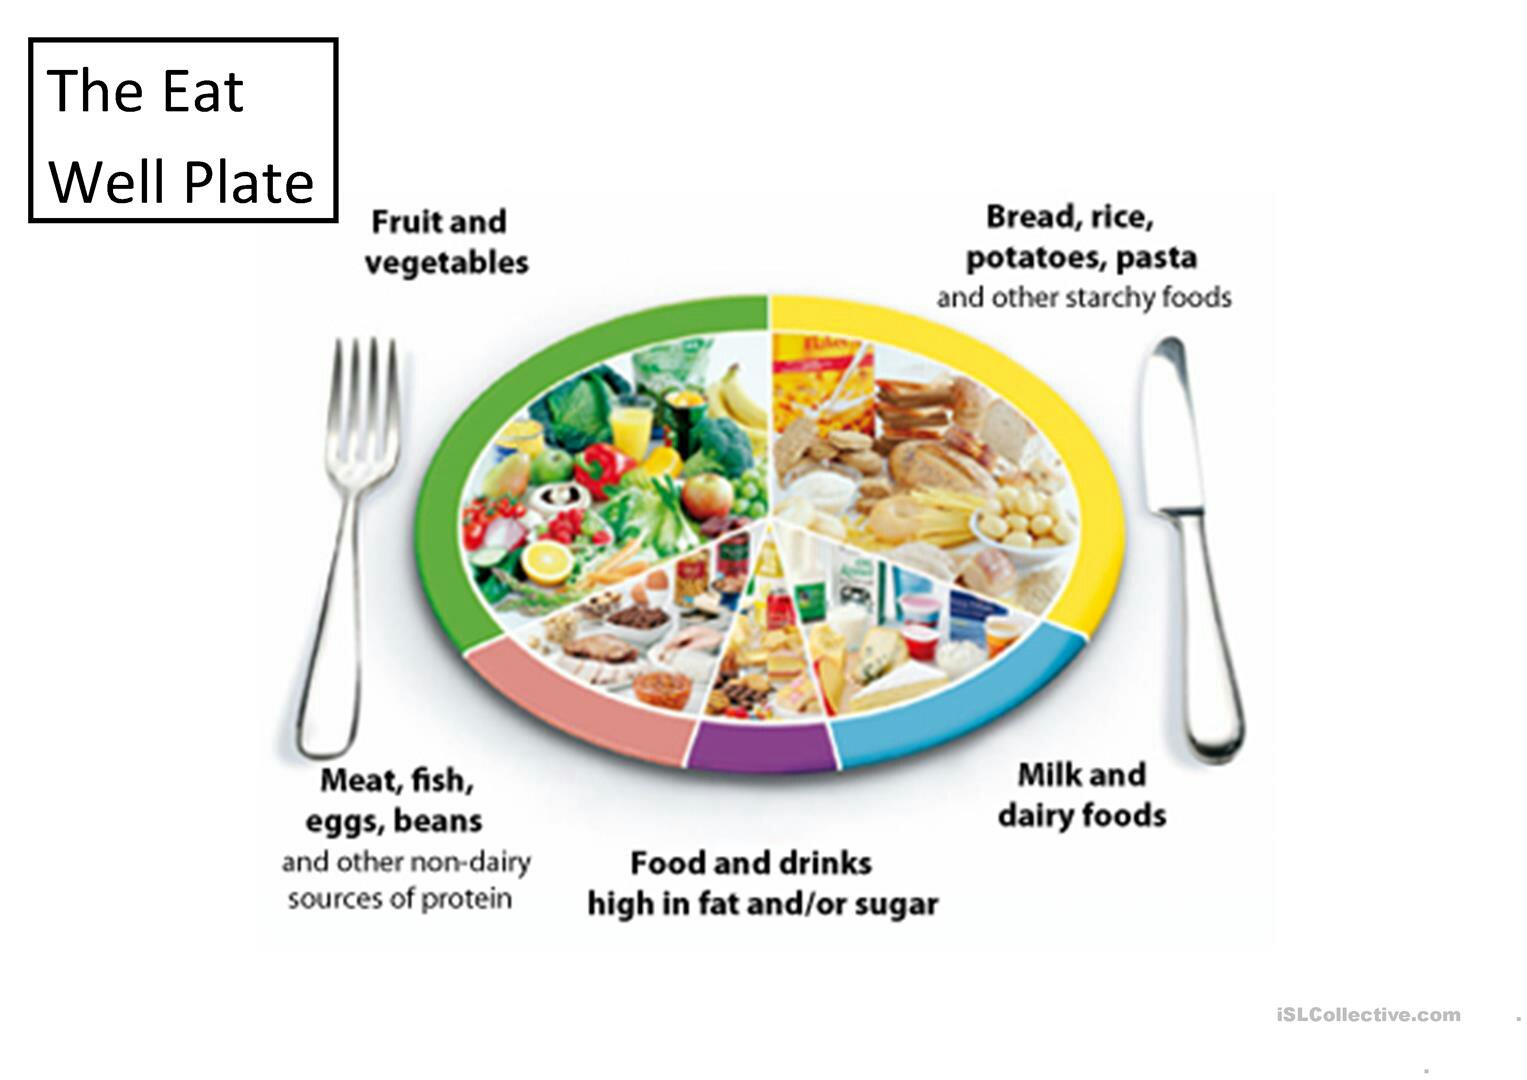 the-eatwell-plate-and-food-groups-activities-promoting-classroom-dynamics-group-form_79377_1.jpg